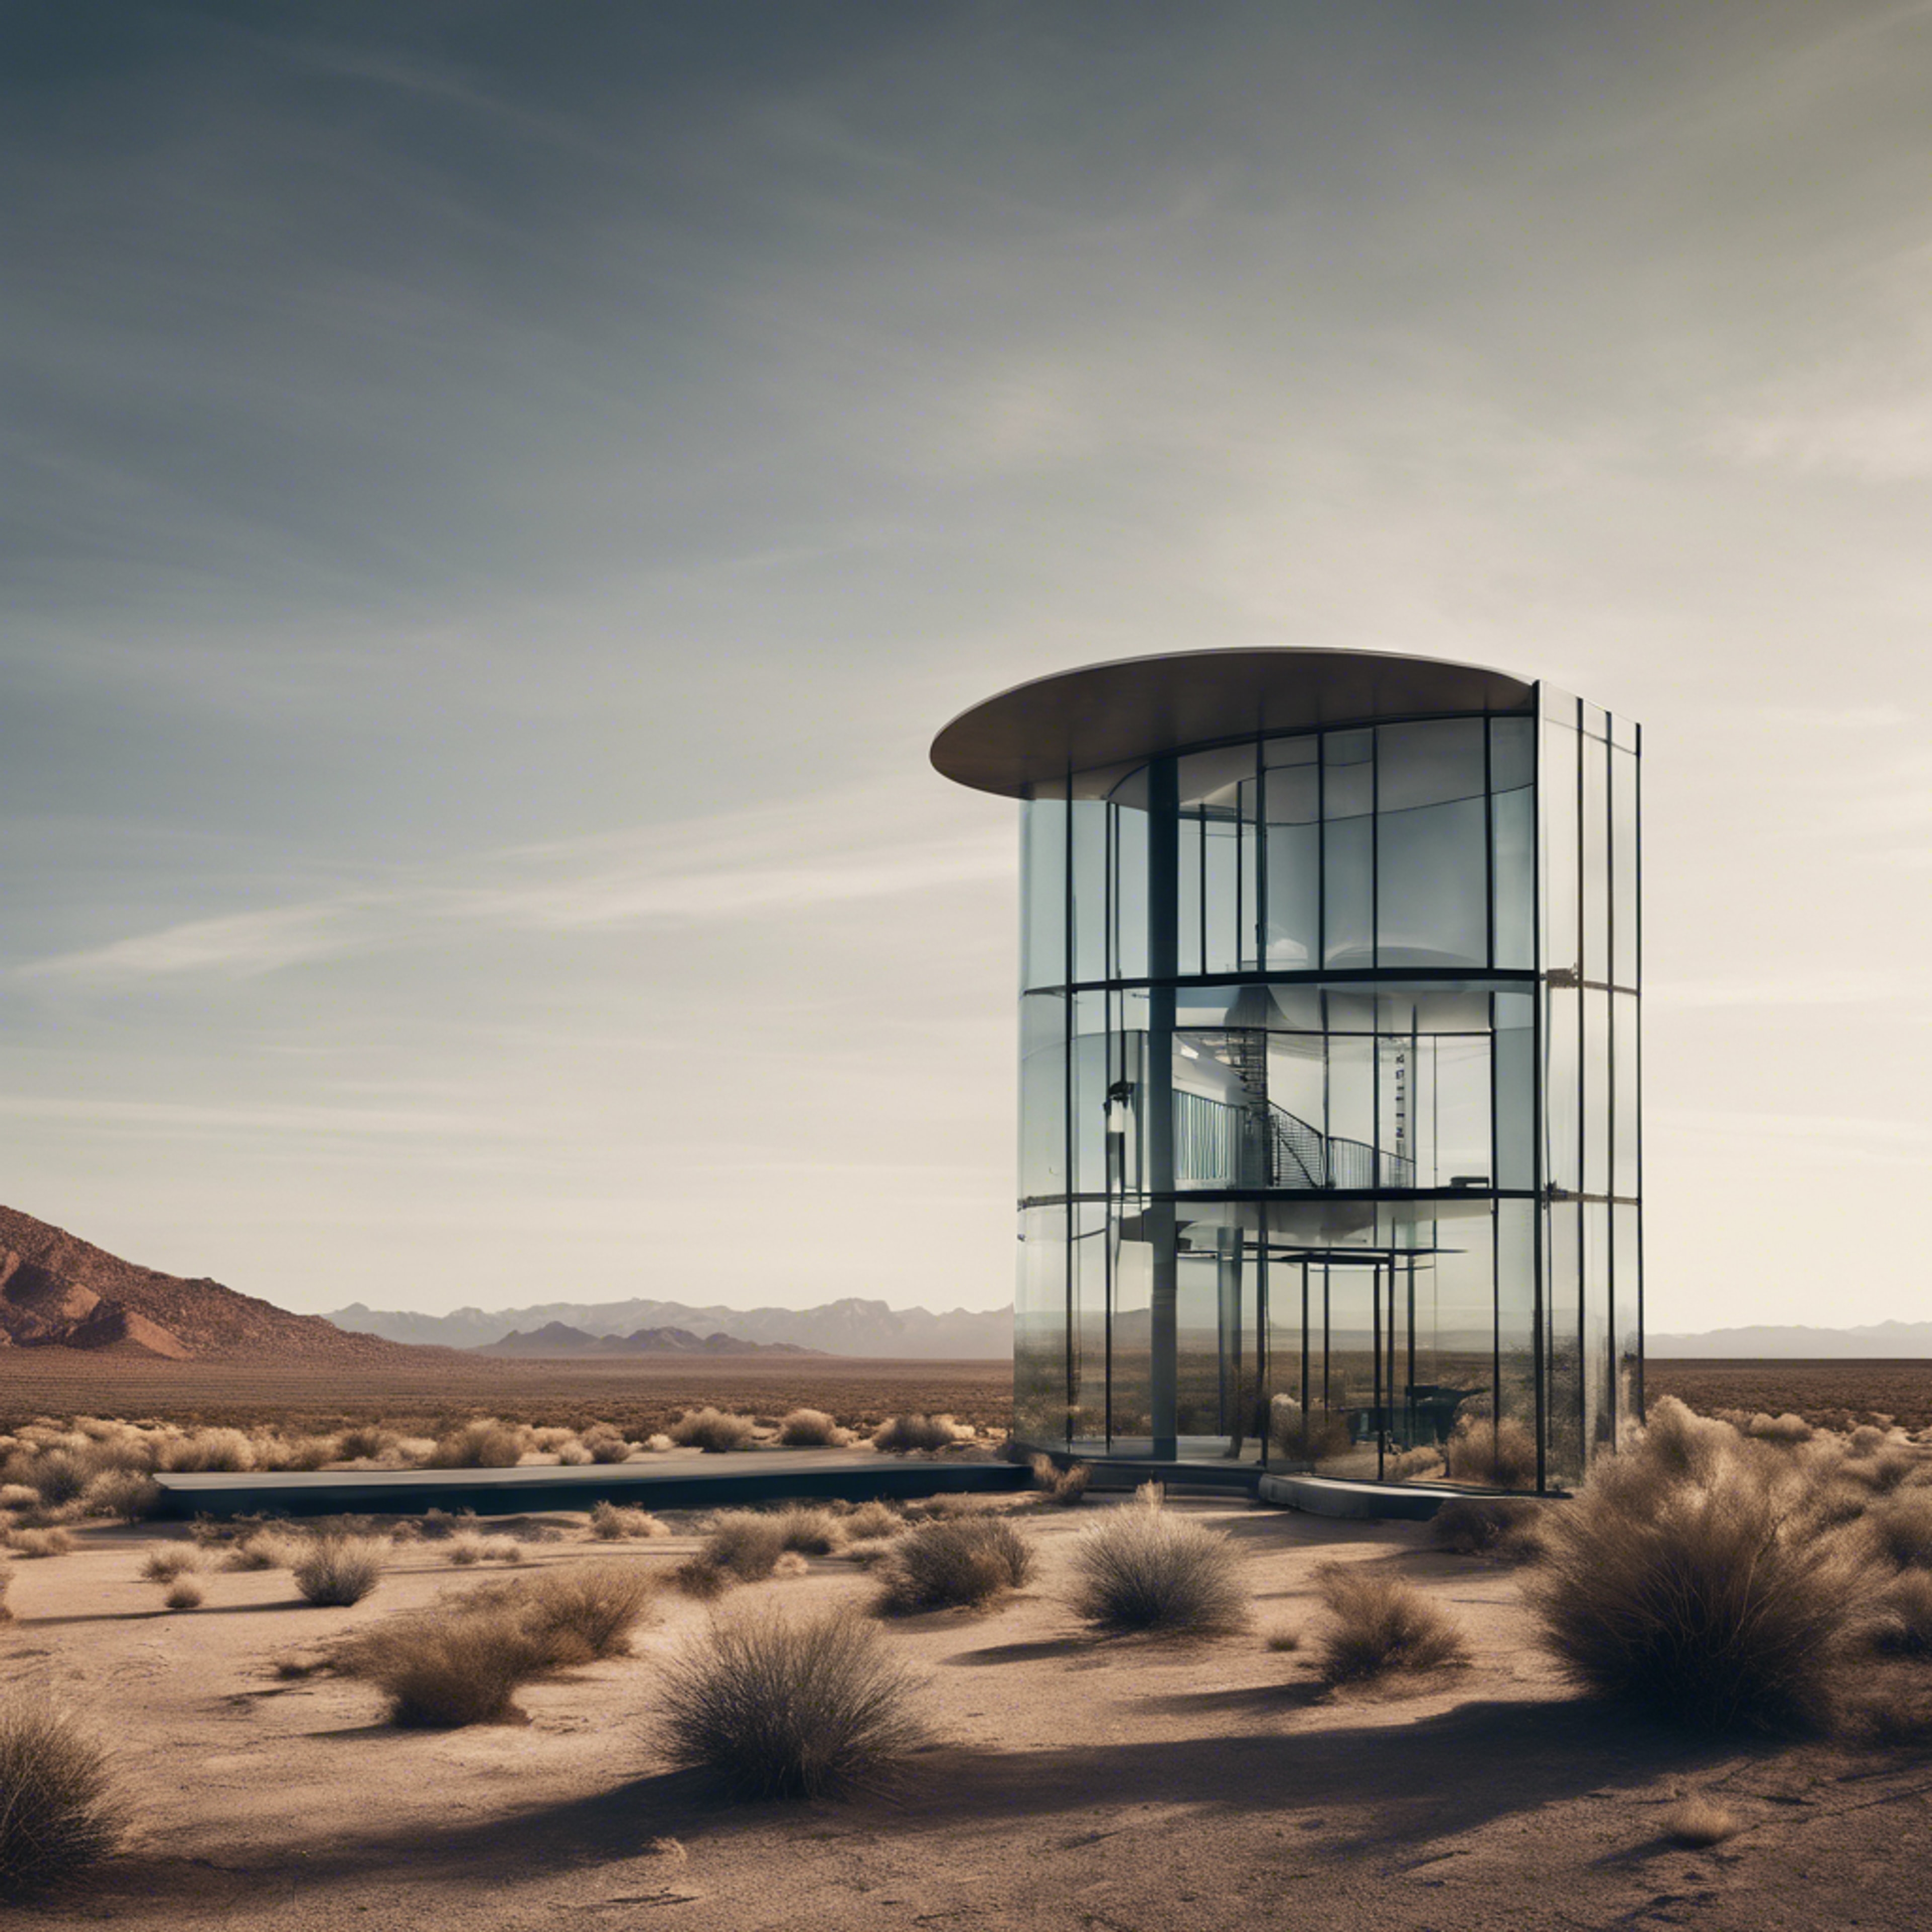 A modern glass structure built in the solitary desert, standing in stark contrast with the natural environment. Wallpaper[81ab0a1fba724369aecb]